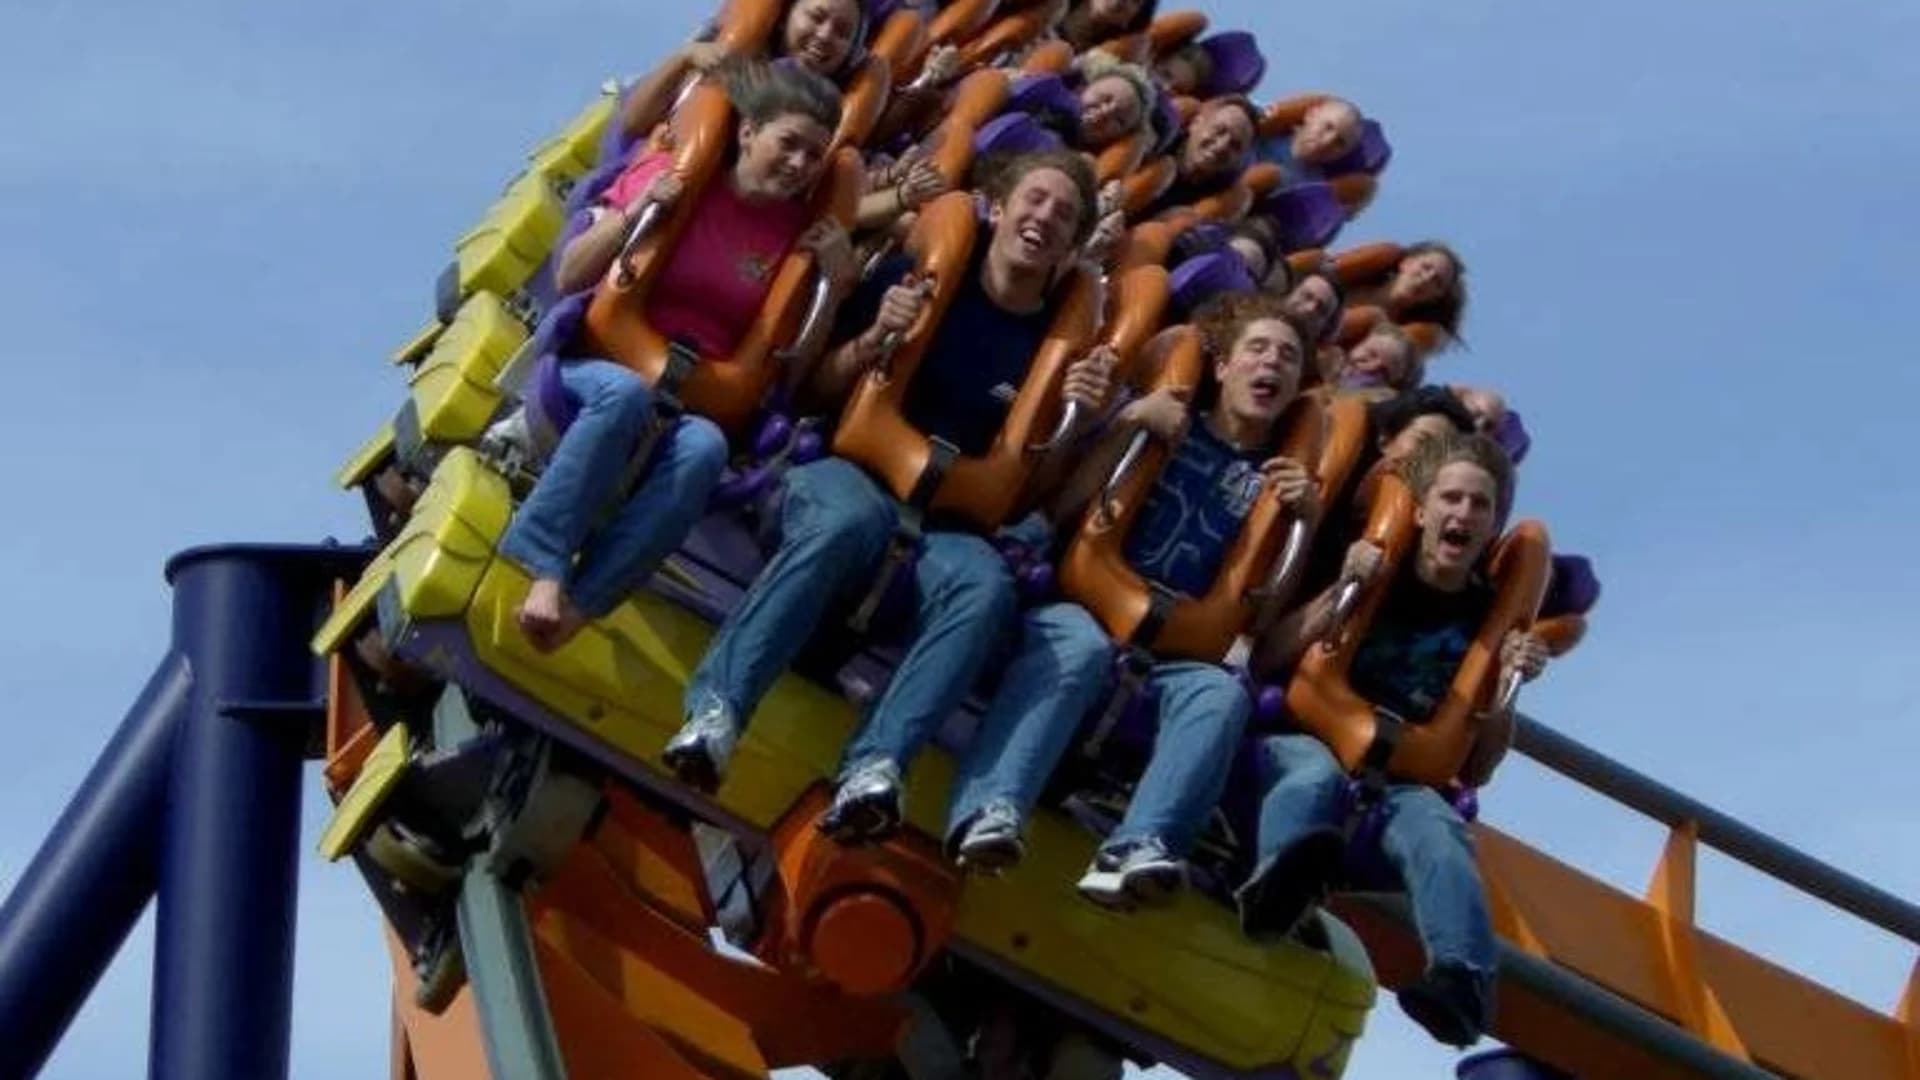 Guide: Deals for National Roller Coaster Day